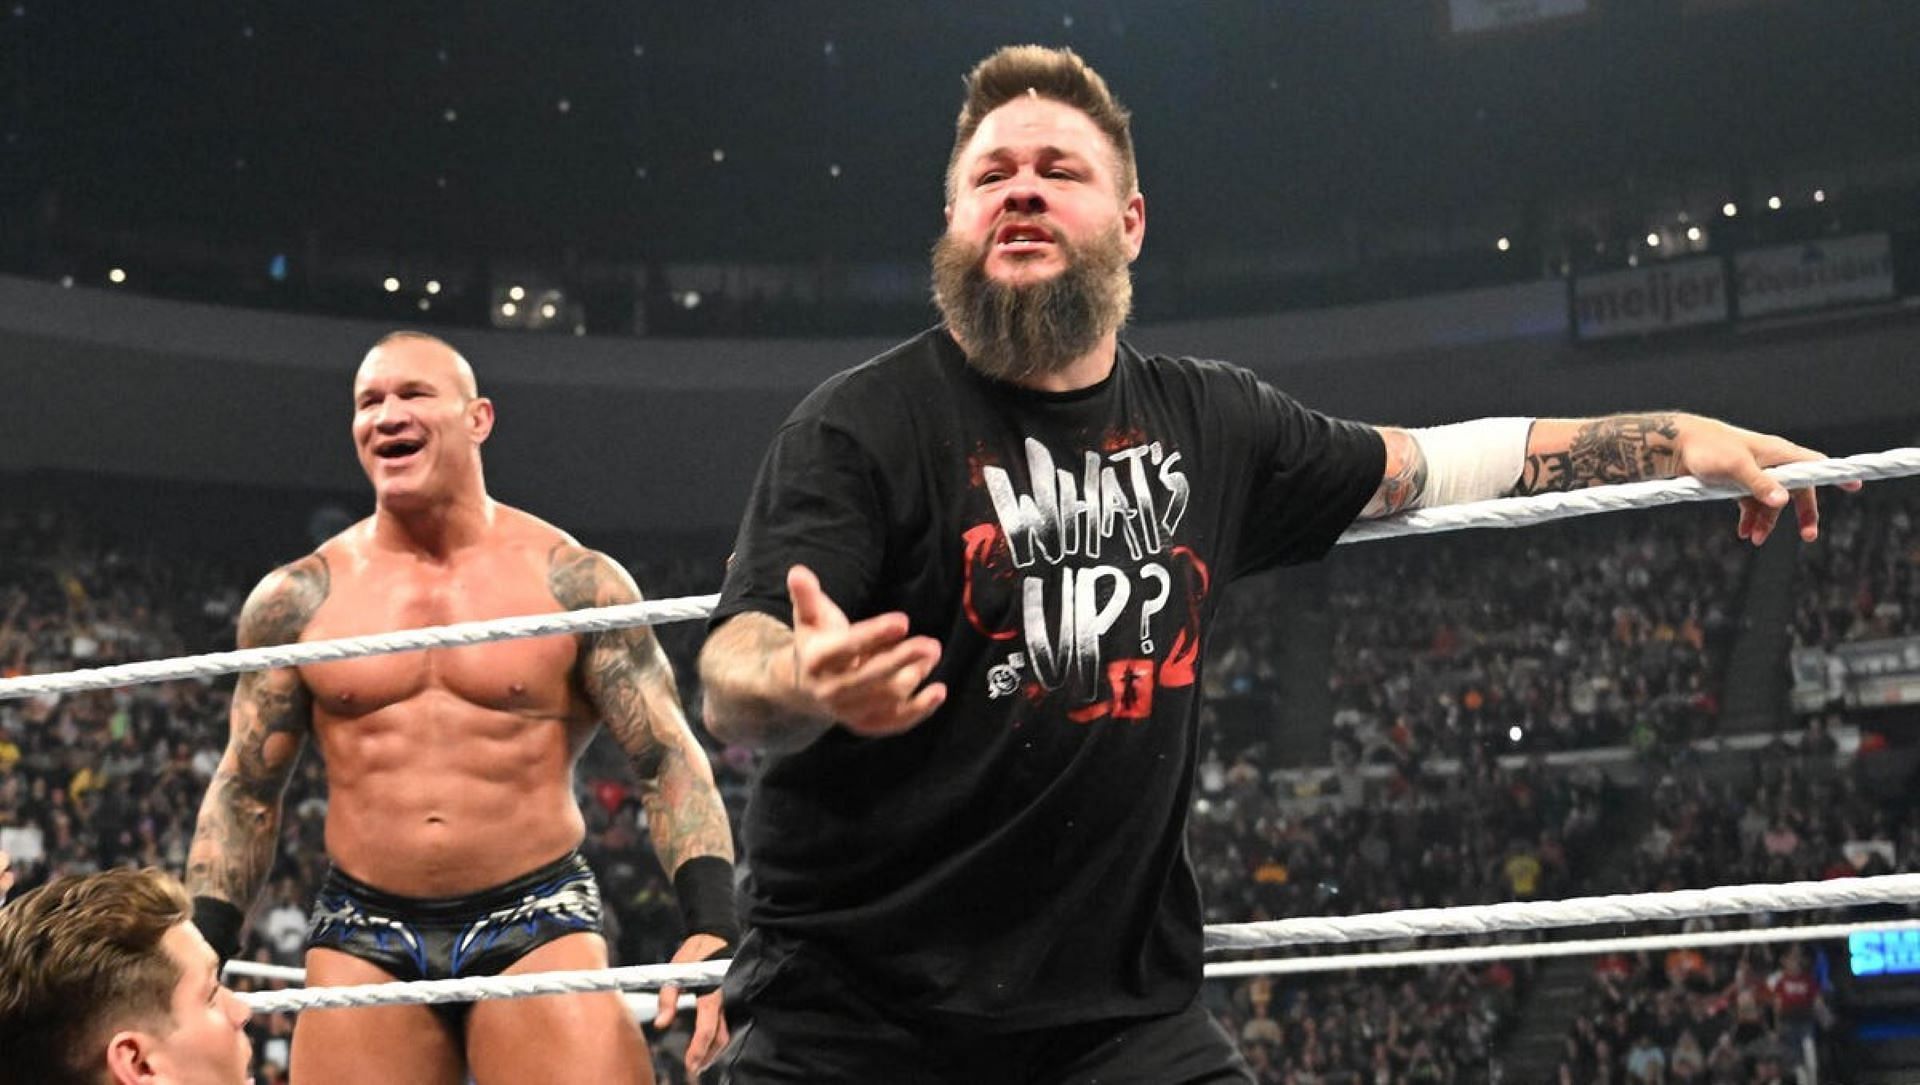 Orton and Owens have aligned with each other recently.